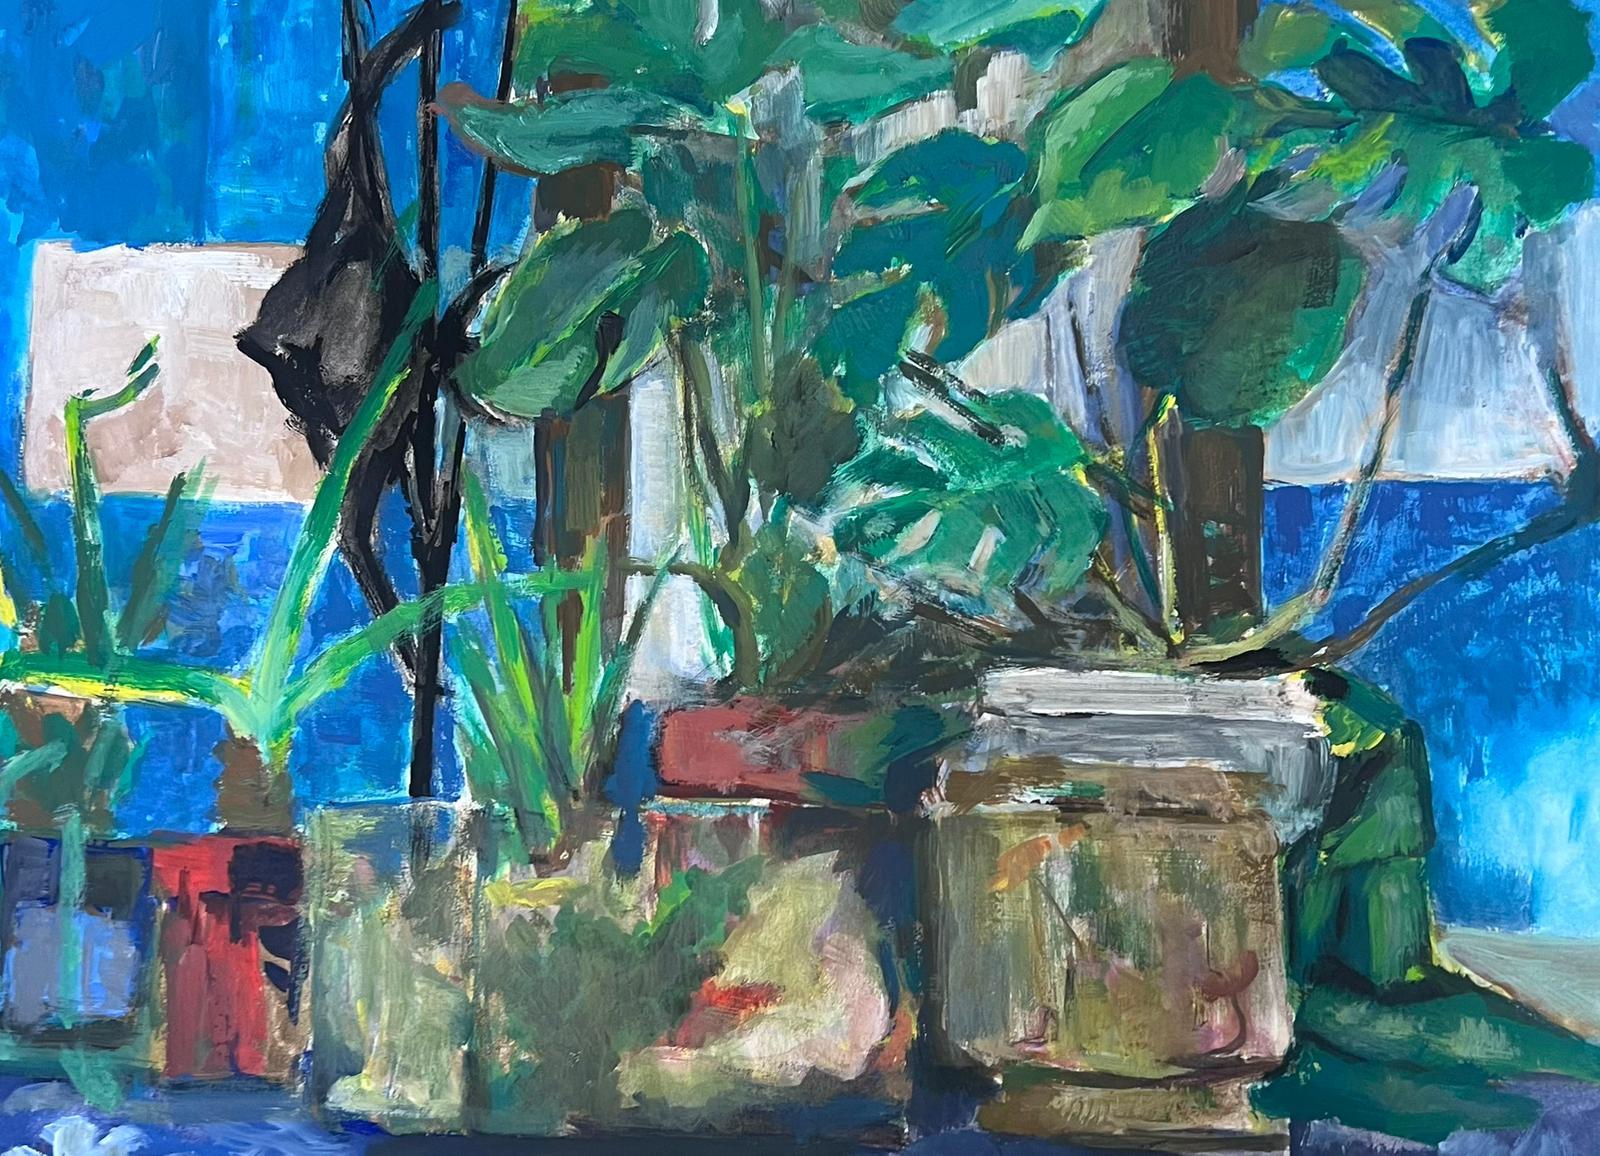 French 20th Century Monstera Deliciosa and Aloe Vera Plants Still Life - Modern Painting by Guy Nicod